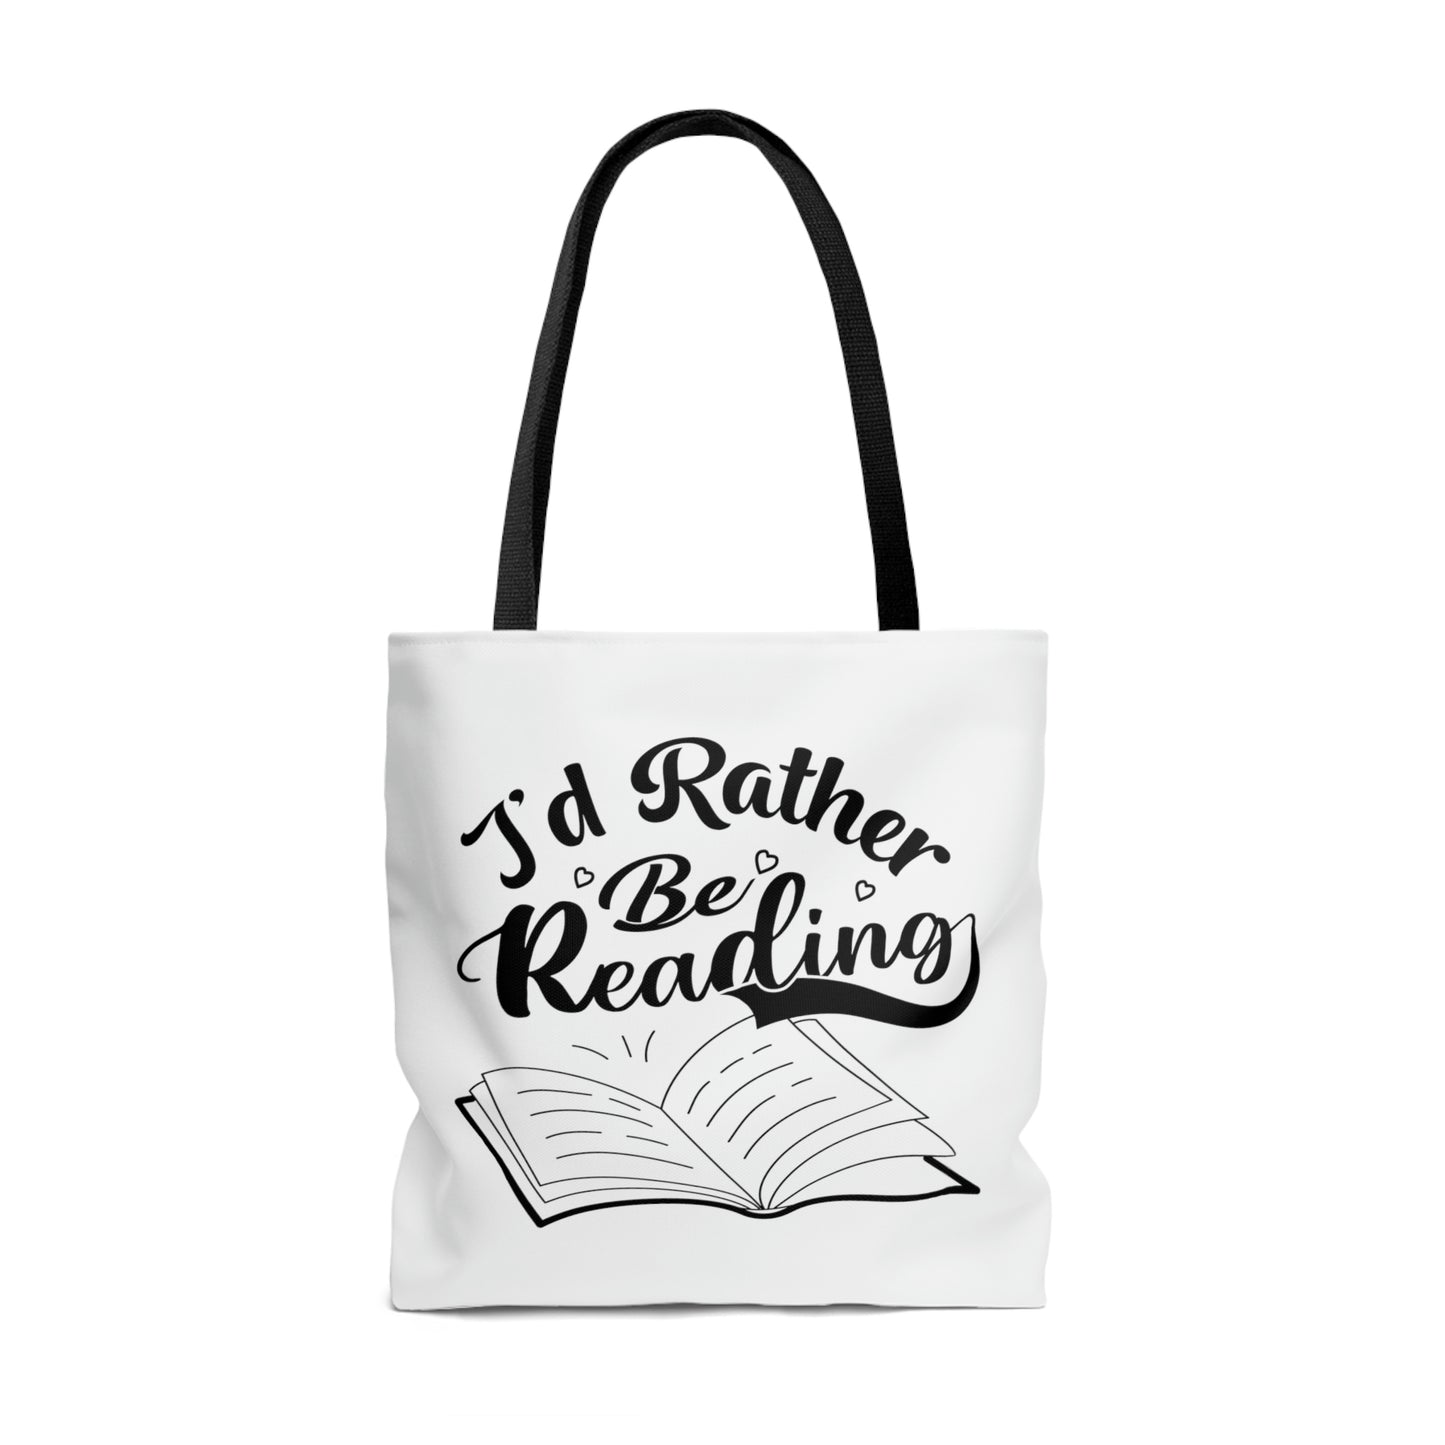 "I'd Rather Be Reading" Large Tote Bag